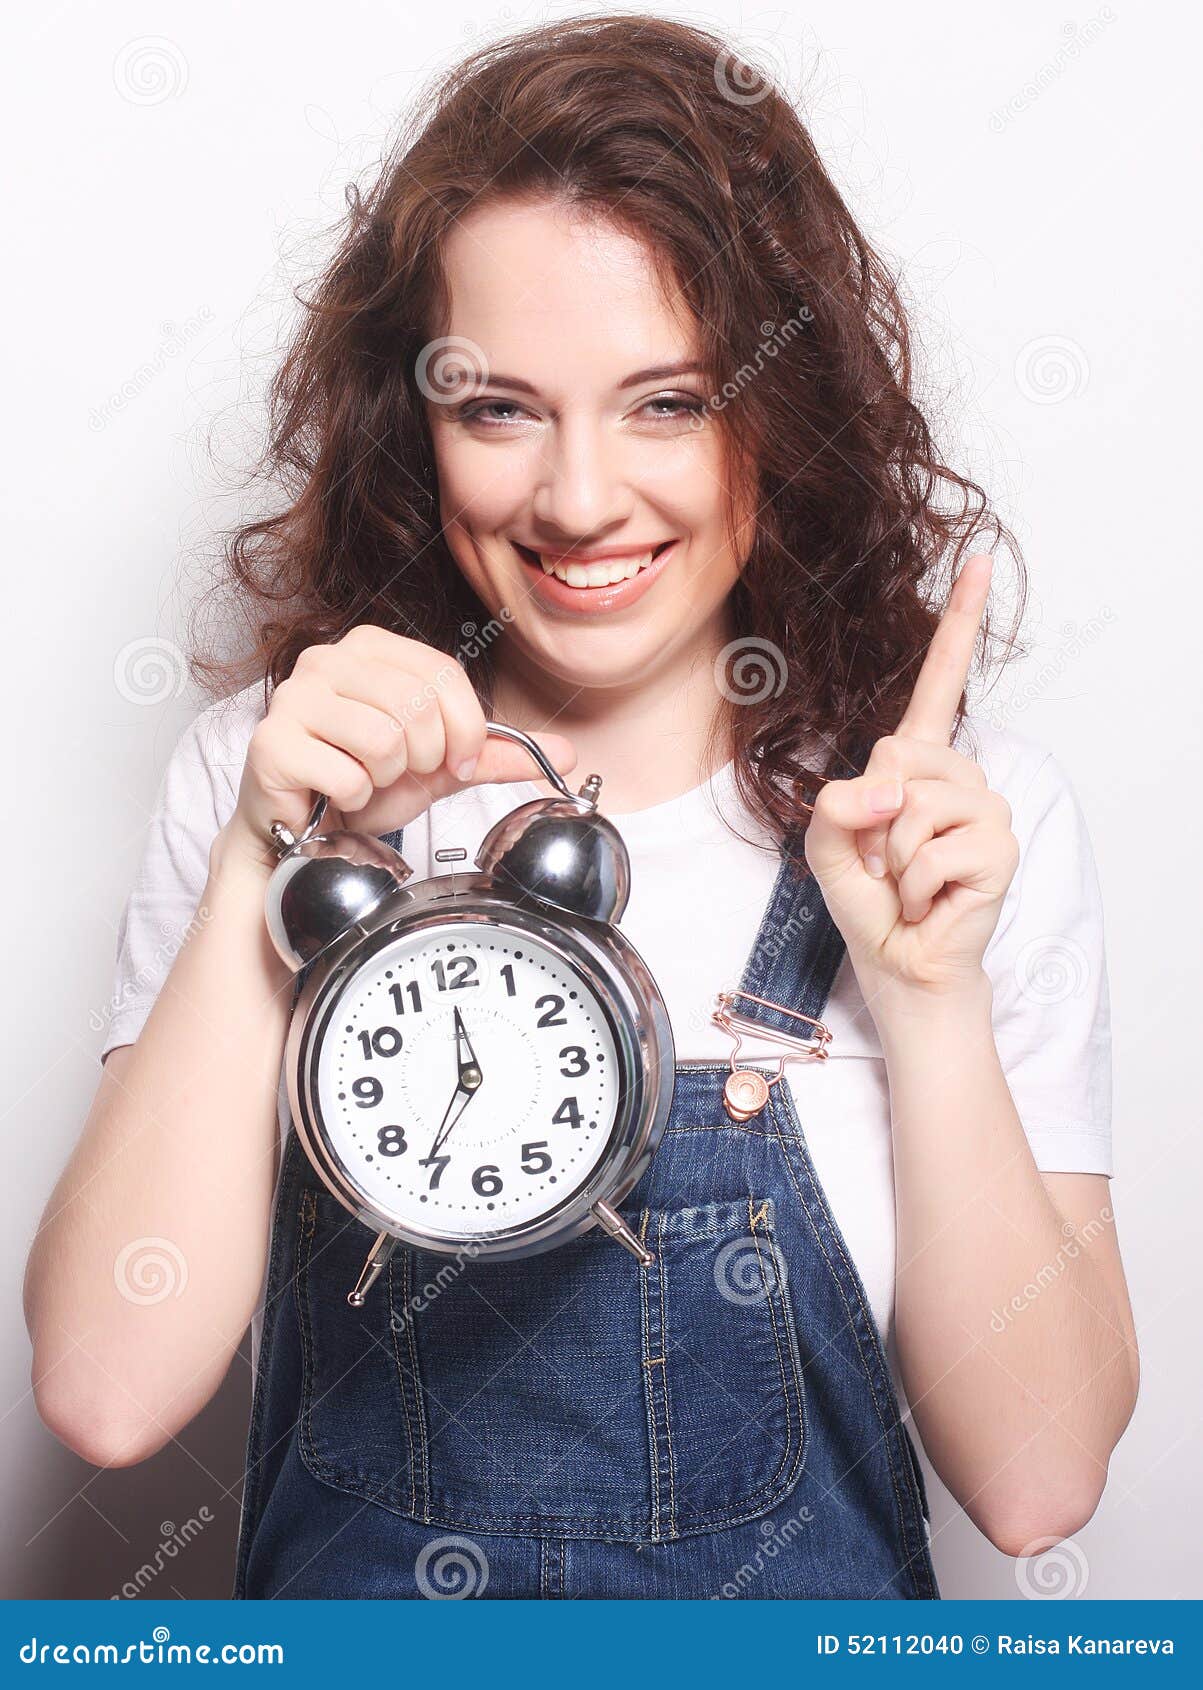 young woman with alarmclock